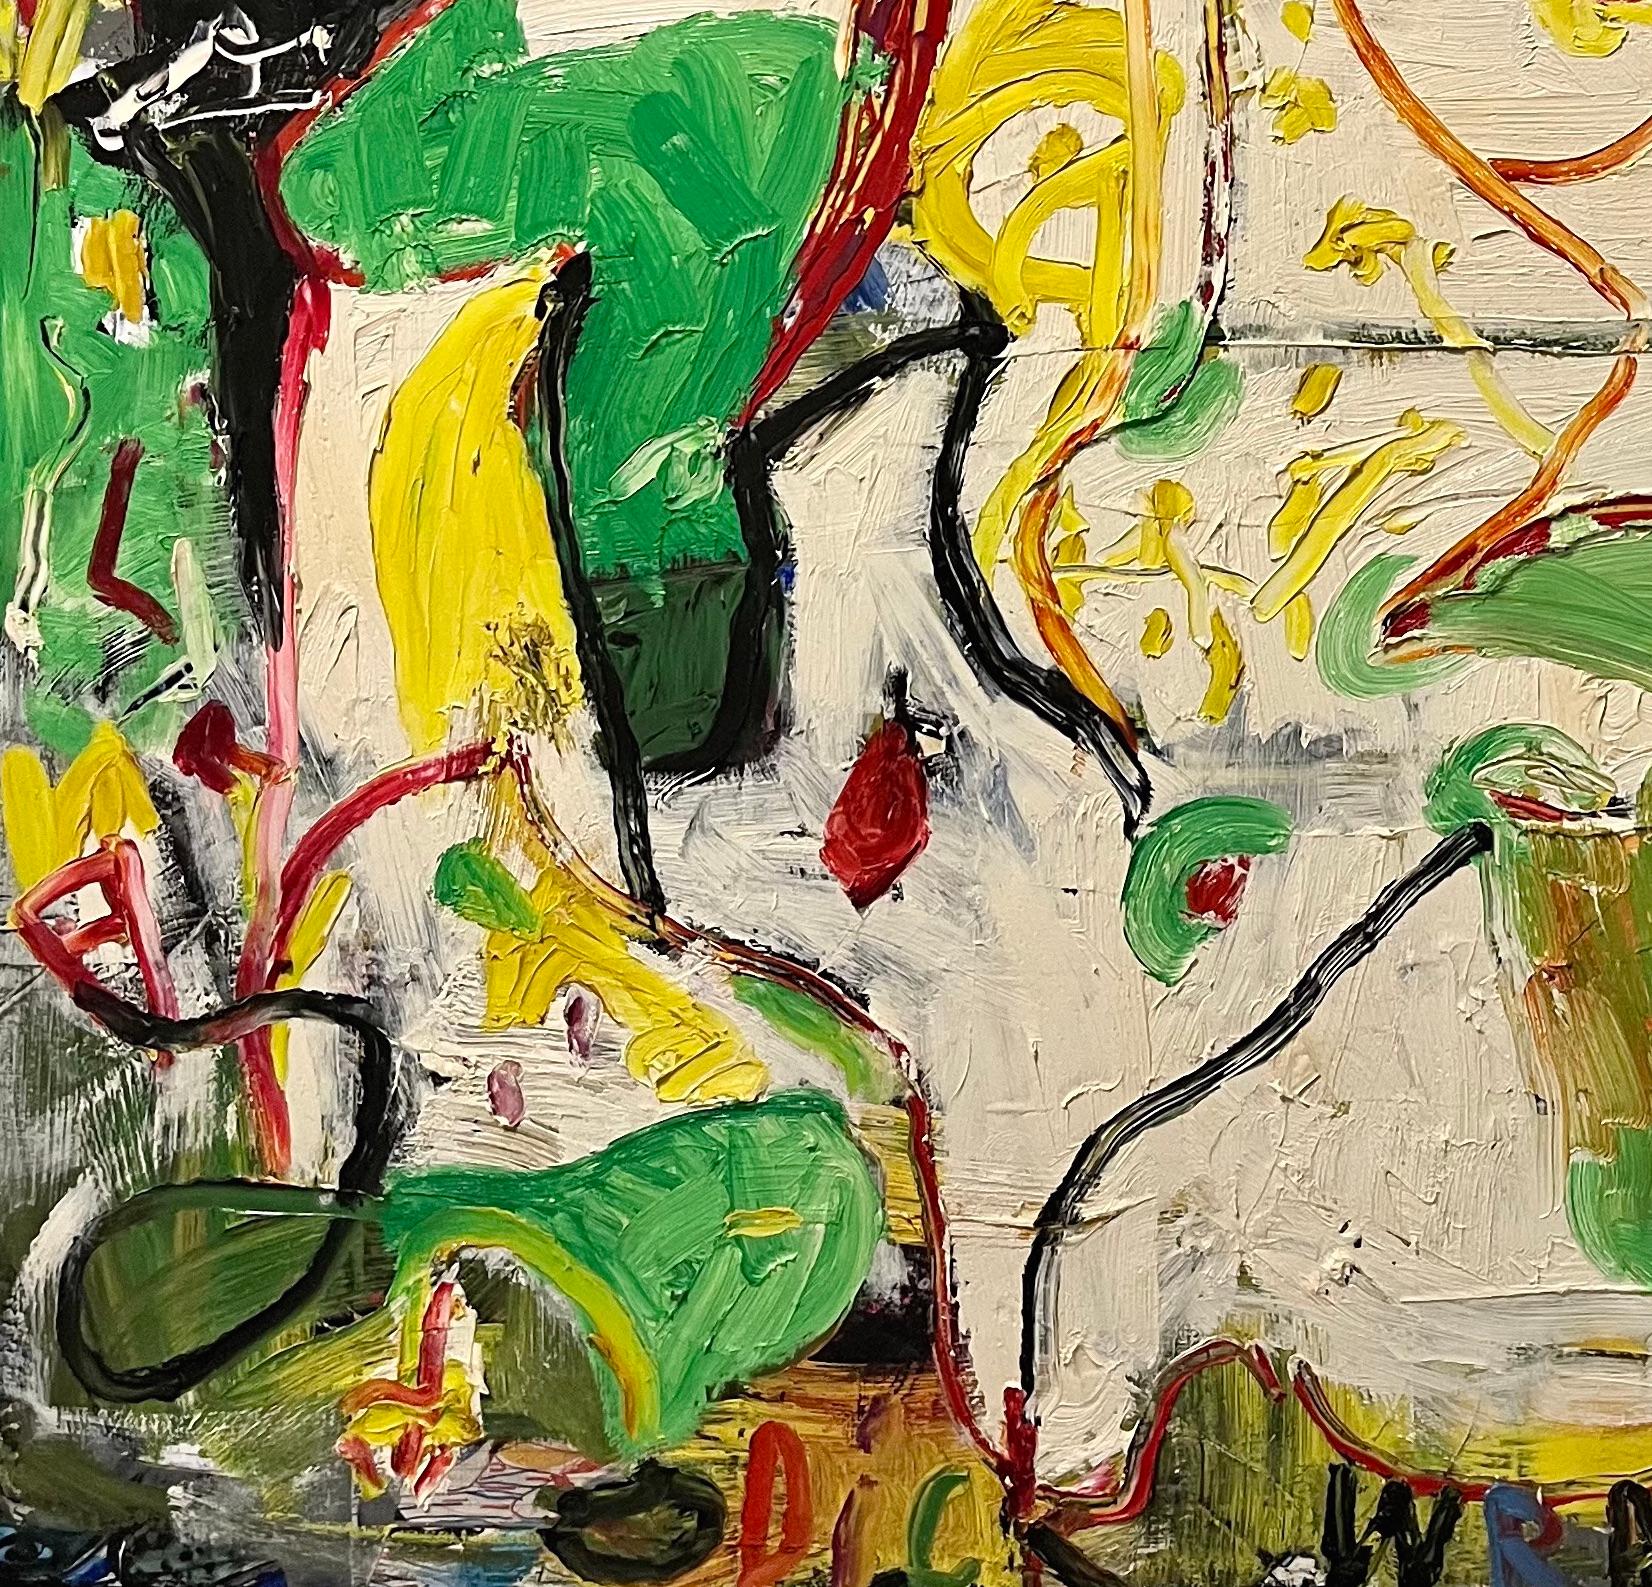 This vibrant artwork by late Houston artist Dick Wray is an abstract oil painting in the style of abstract expressionism. Thick layers of paint foster a remarkable tactility commonly found in Dick Wray’s artwork. However, underneath the bustling